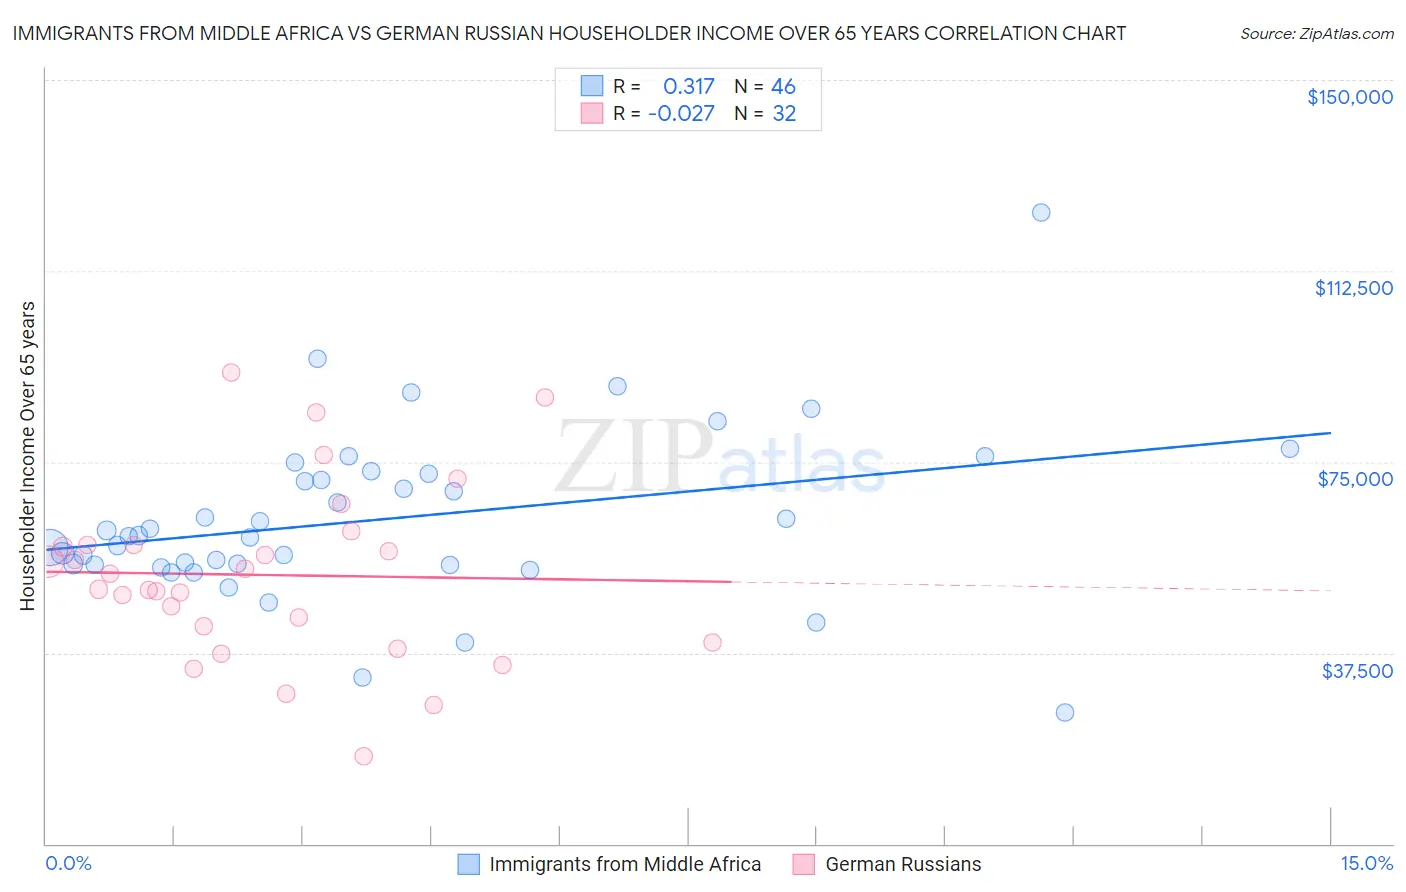 Immigrants from Middle Africa vs German Russian Householder Income Over 65 years